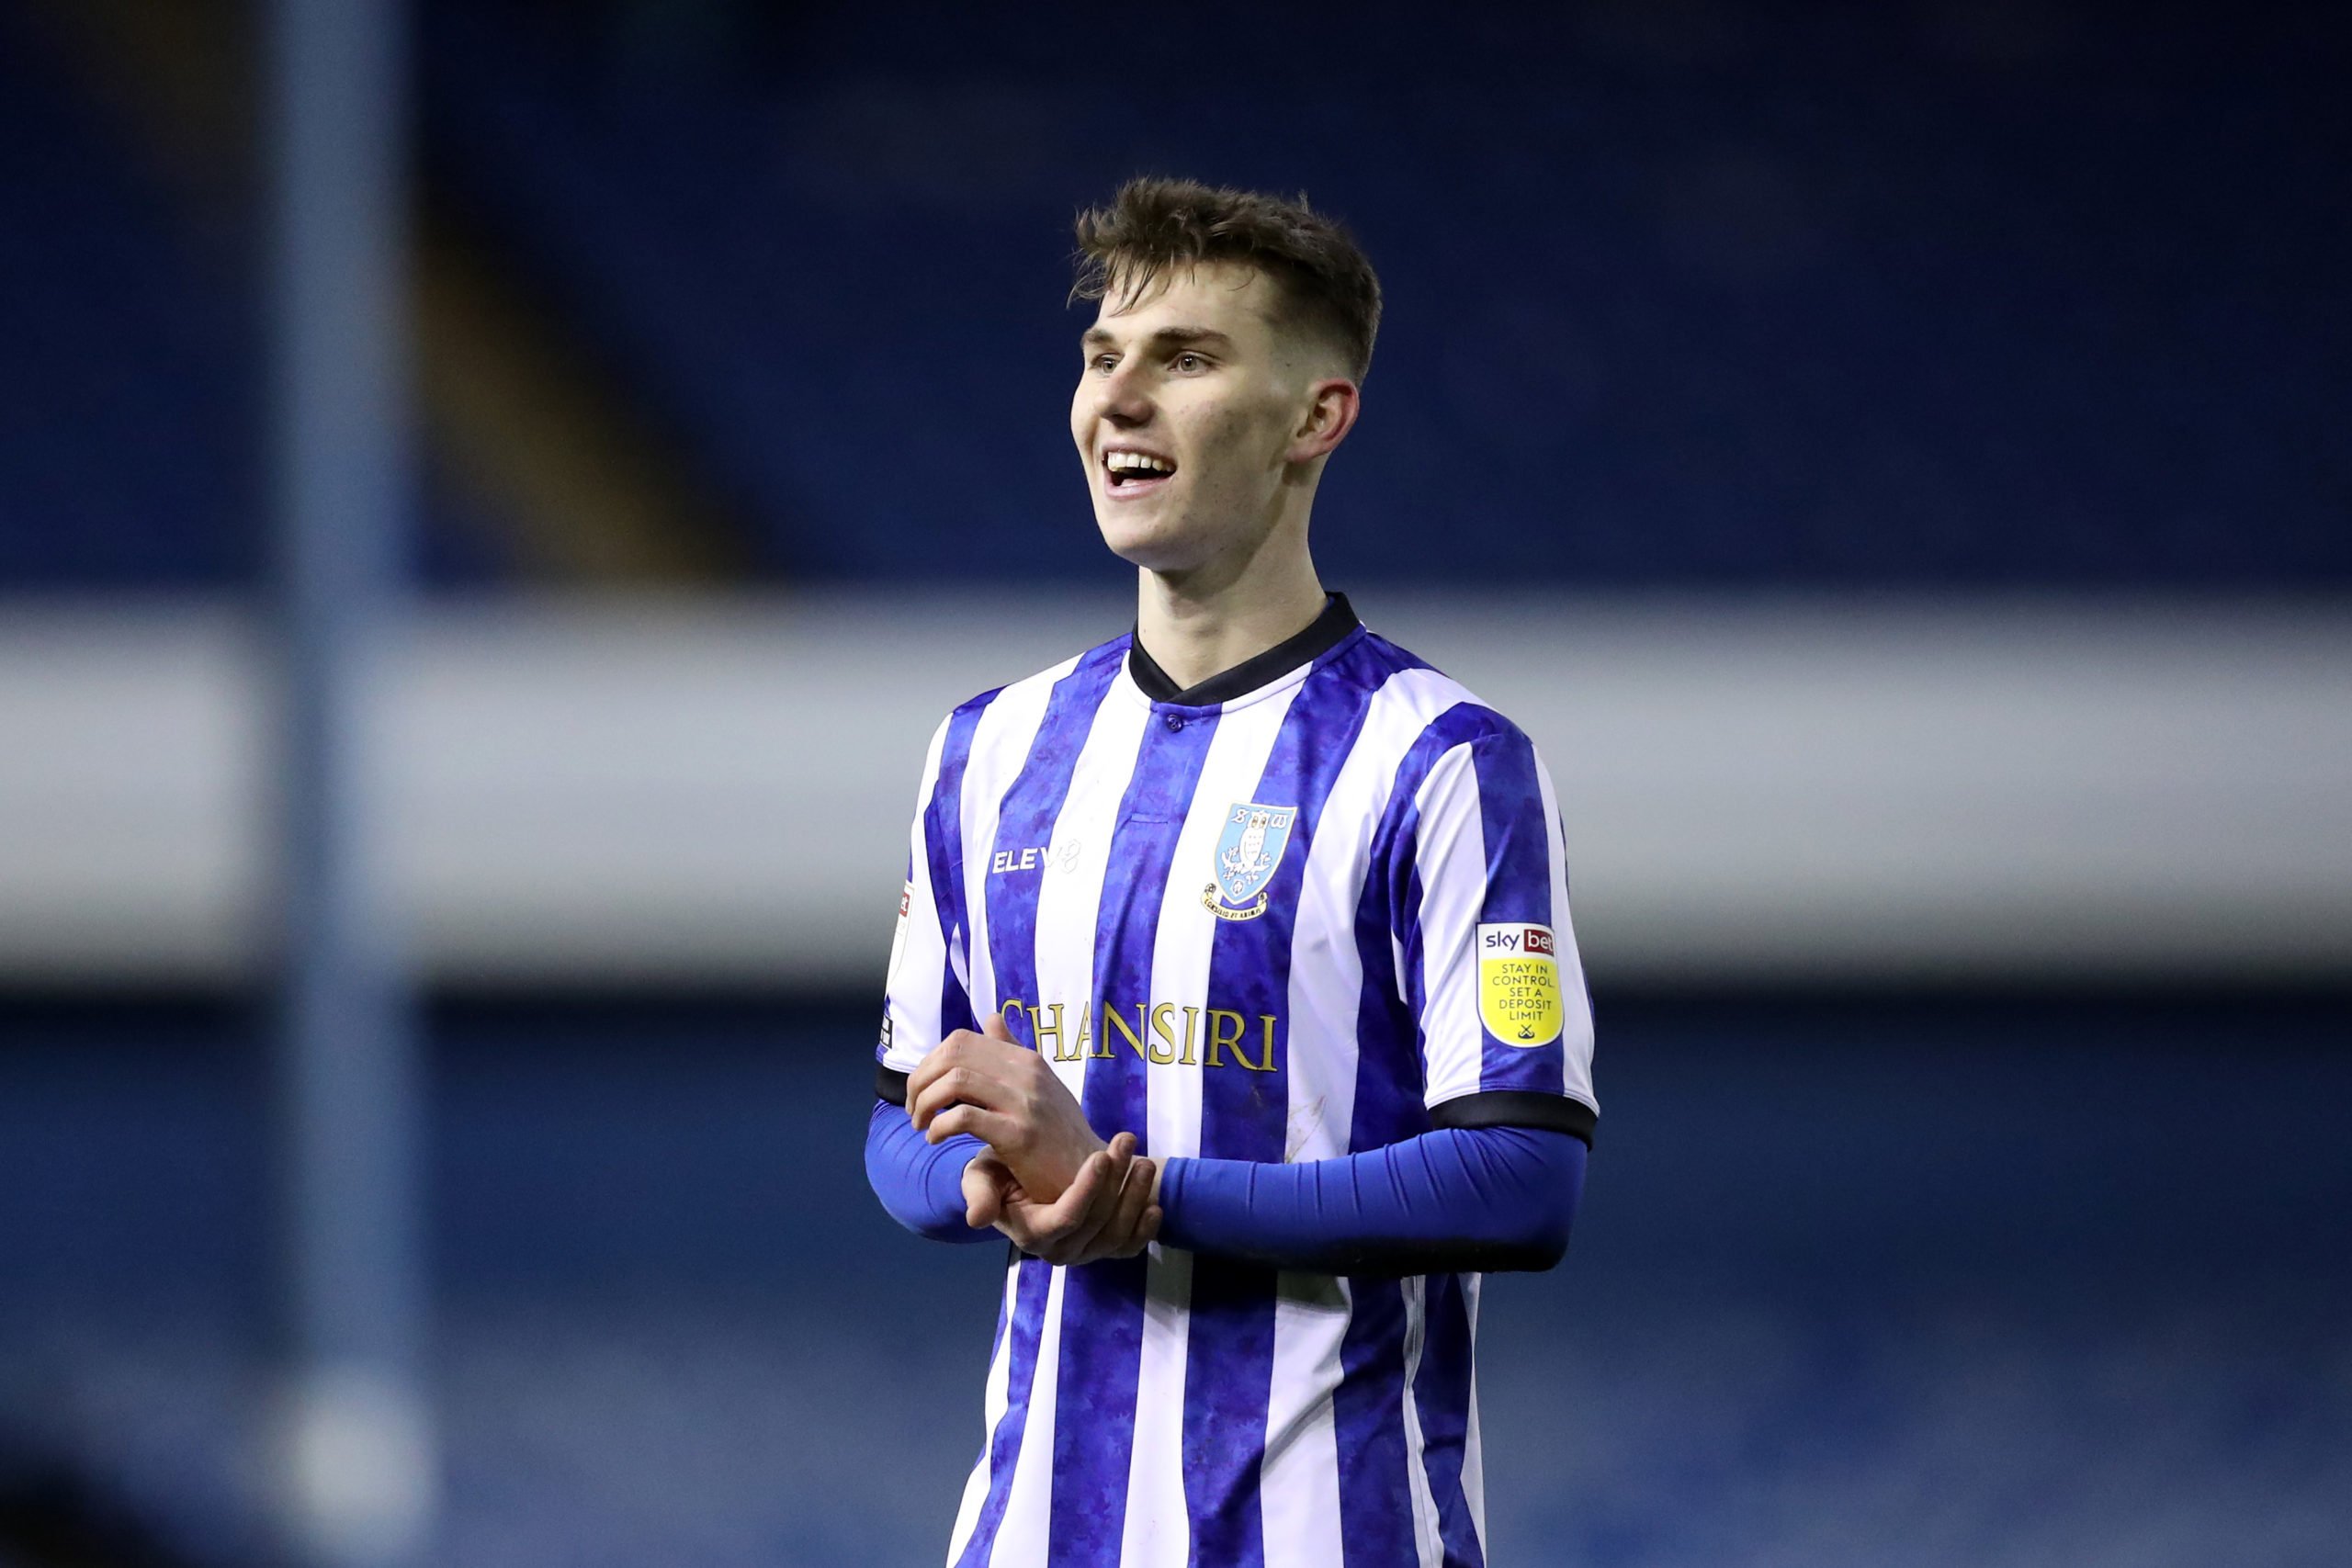 "Wonderful"; Sheffield Wednesday supporters laud Celtic-bound Liam Shaw after superb pass